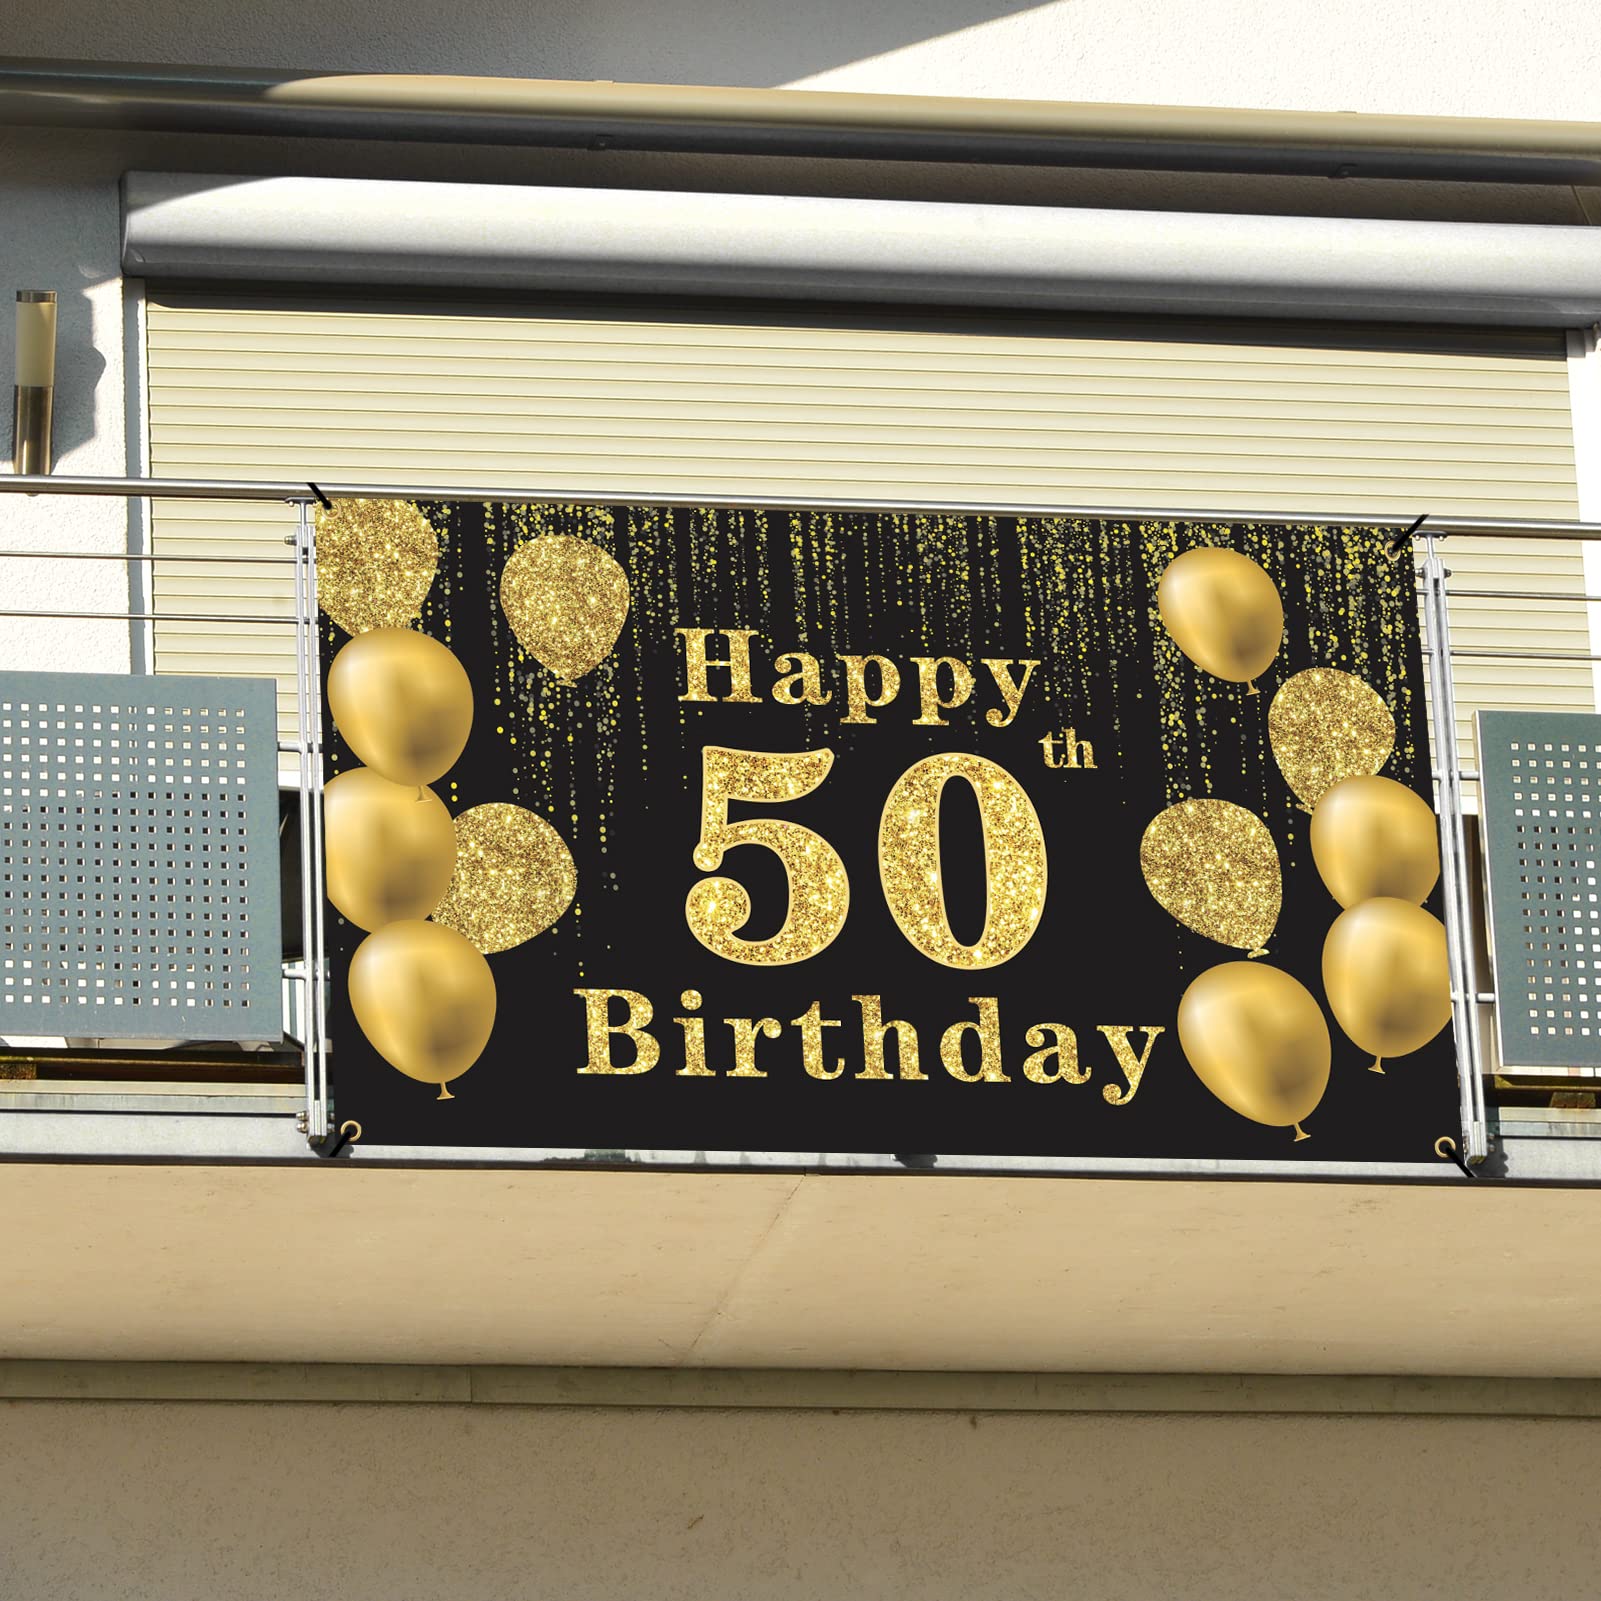 Crenics Happy 50th Birthday Backdrop Banner, Extra Large 50 Birthday Photo Background, Black Gold 50 Years Old Birthday Decorations Party Supplies for Men Women, 5.9 x 3.6 ft